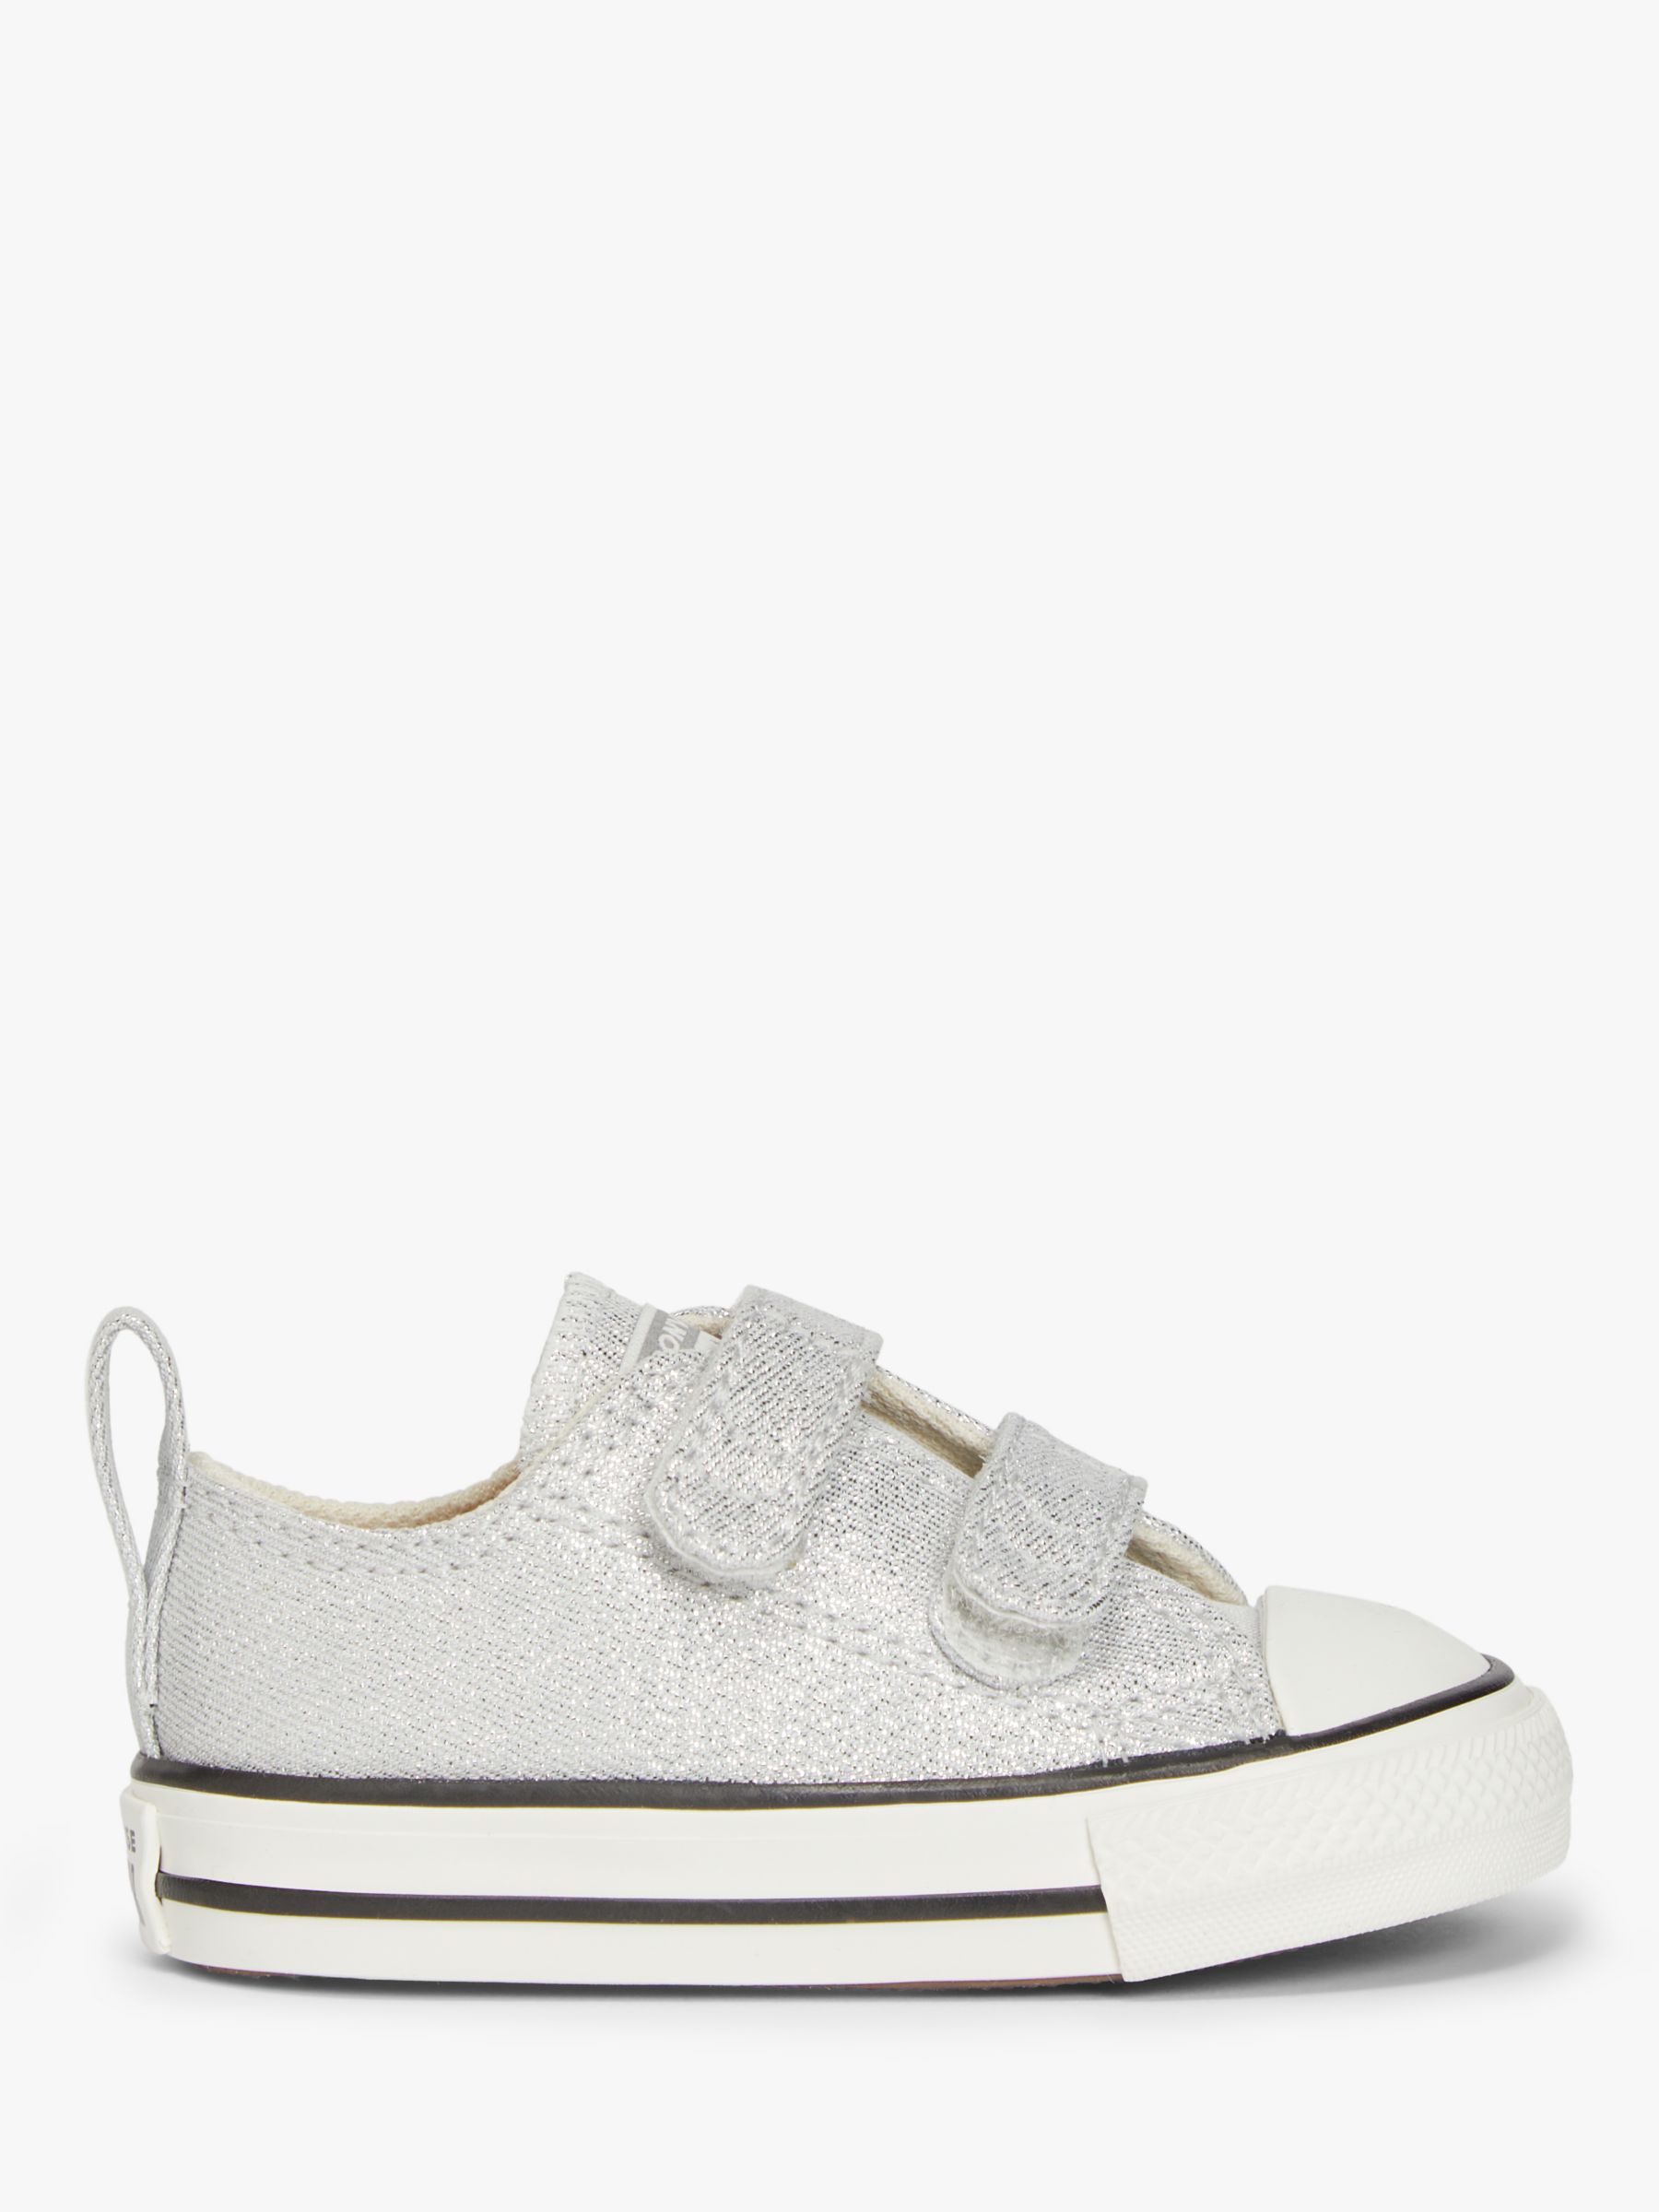 converse baby trainers